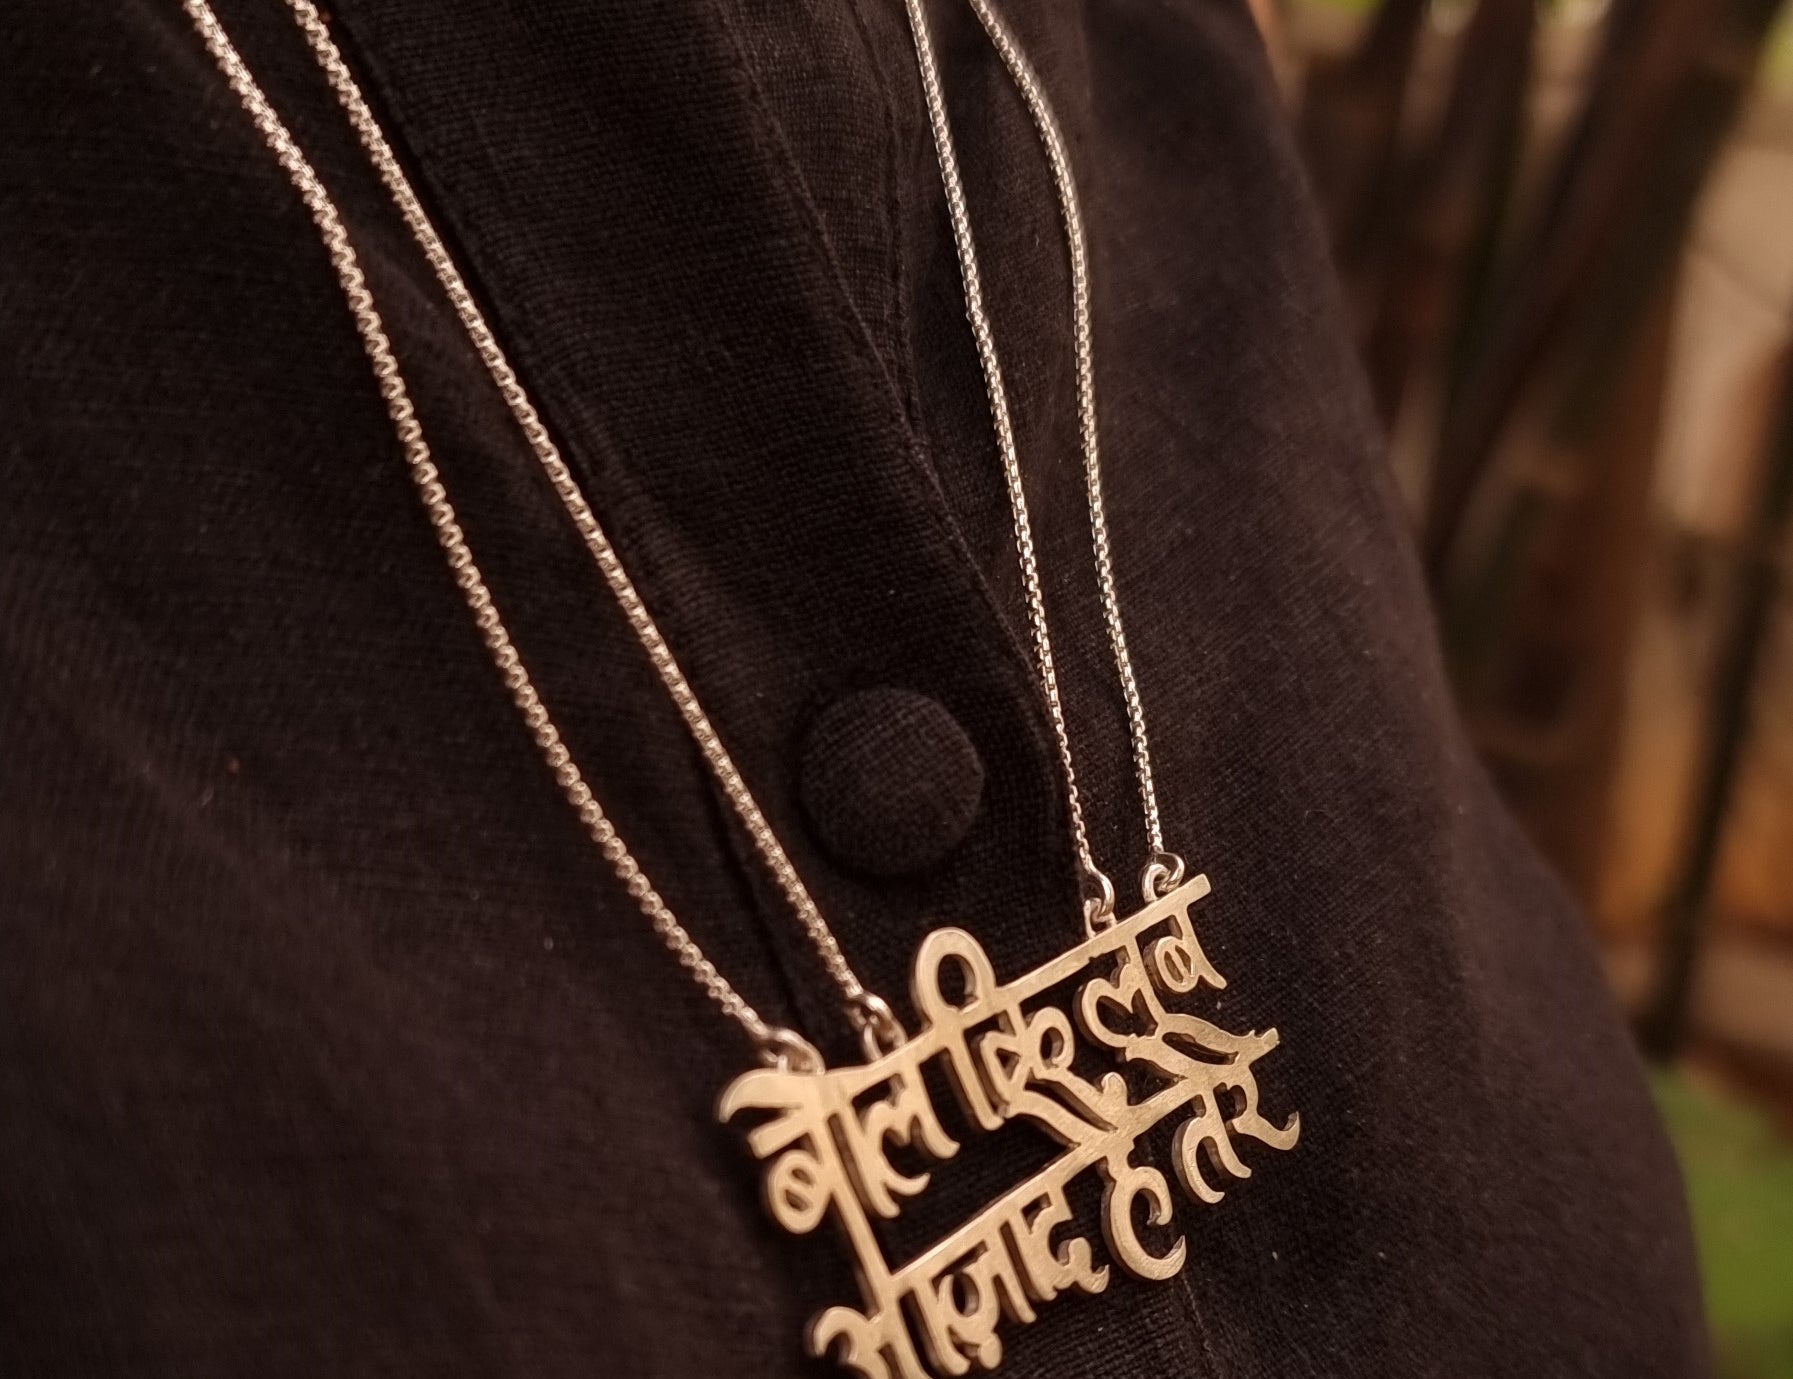 Quirksmith Handcrafted Lab Azaad Hai Tere Necklace - Poetic Jewelry on Shark Tank India | 92.5 Silver